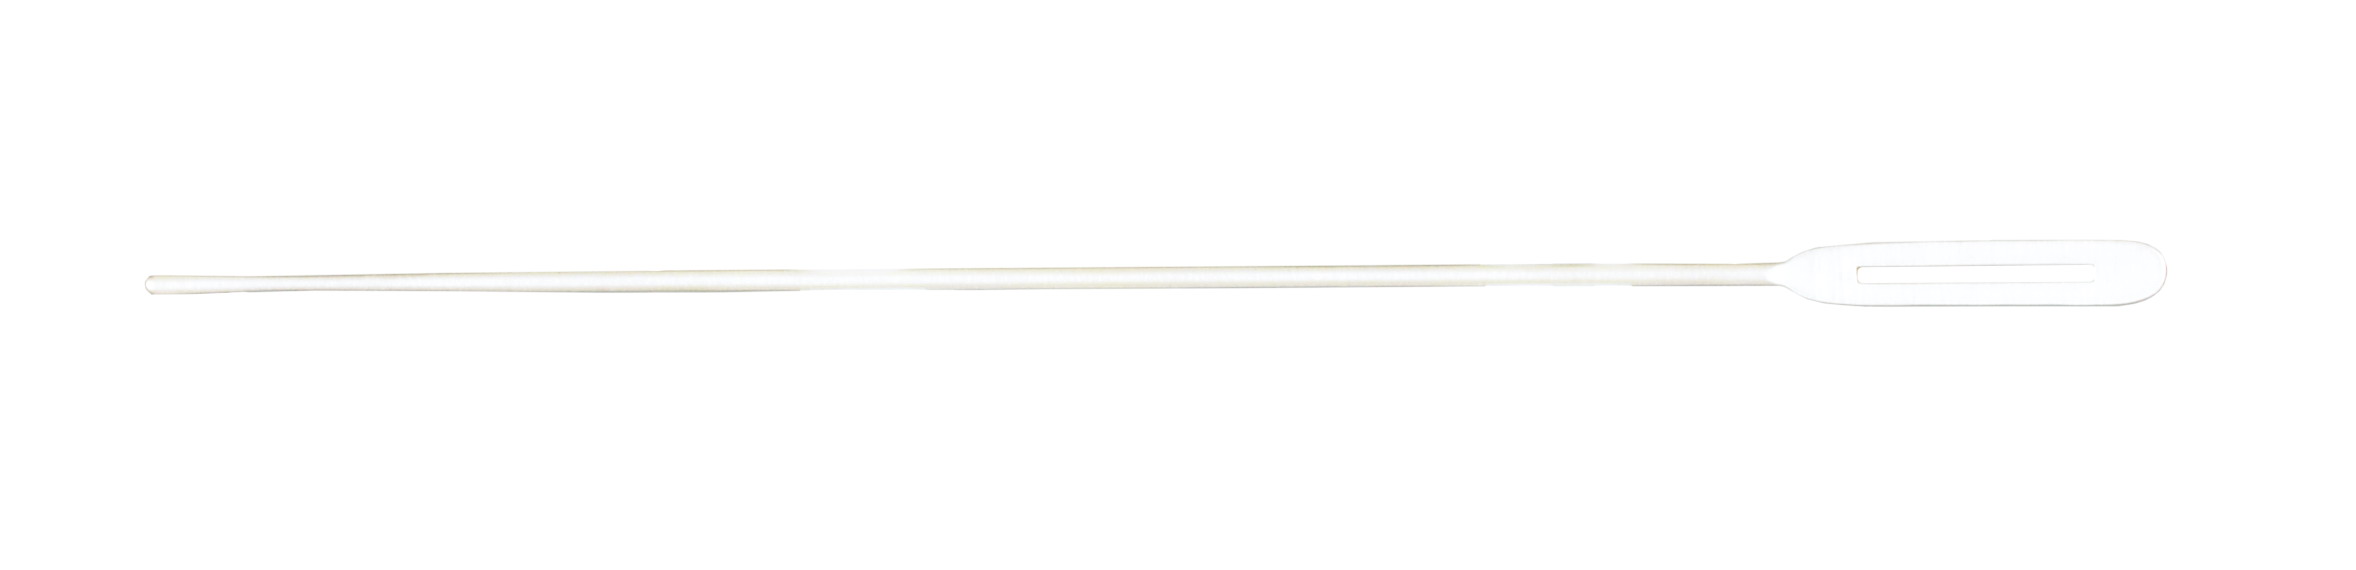 miltex-probes-with-eye-malleable-6-152-cm-sterling-10-28-st-miltex.jpg